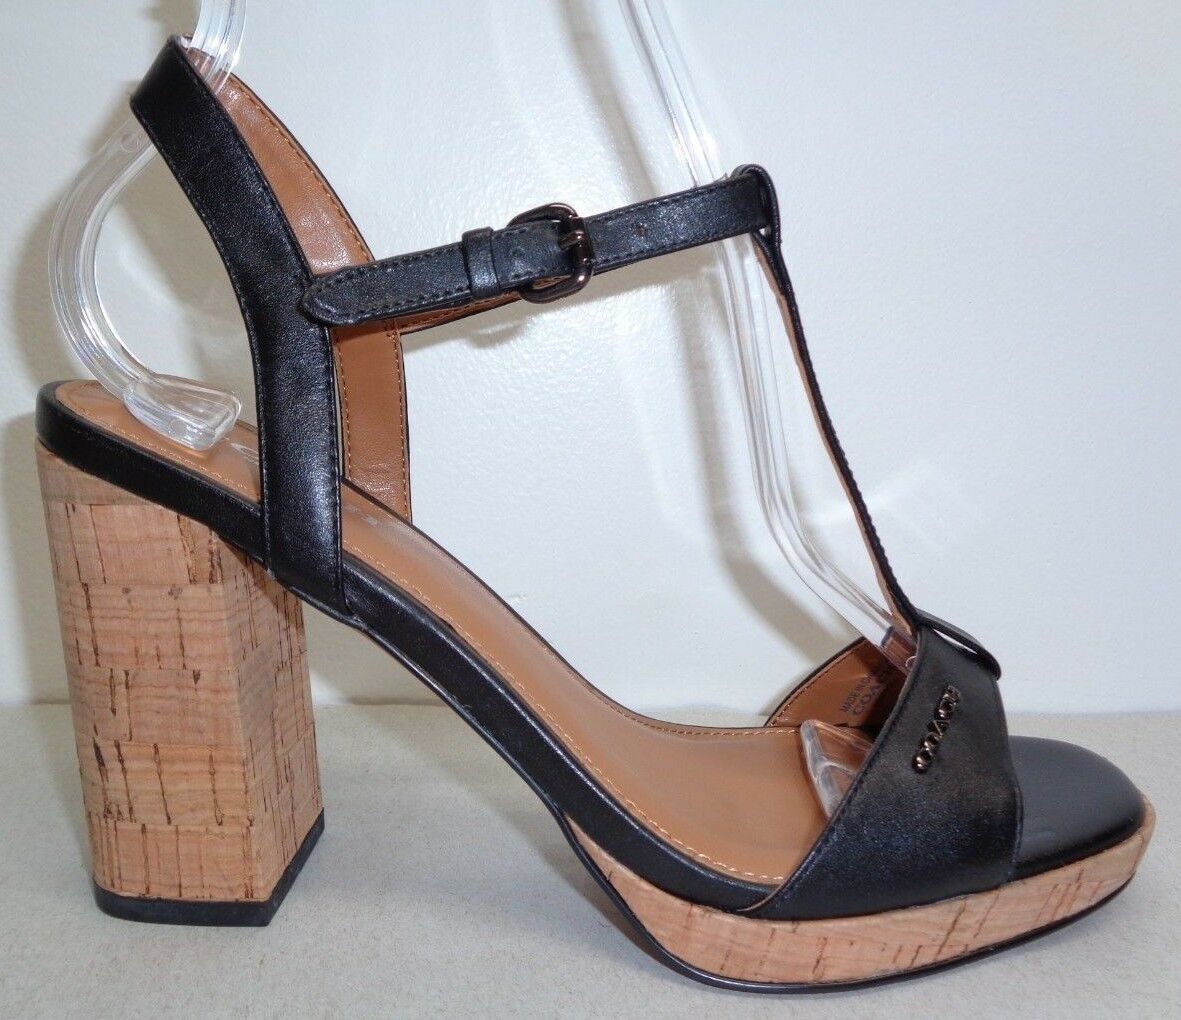 Coach Size 9.5 M BRIANNA Black Leather Heels Sandals New Womens Shoes - $81.13